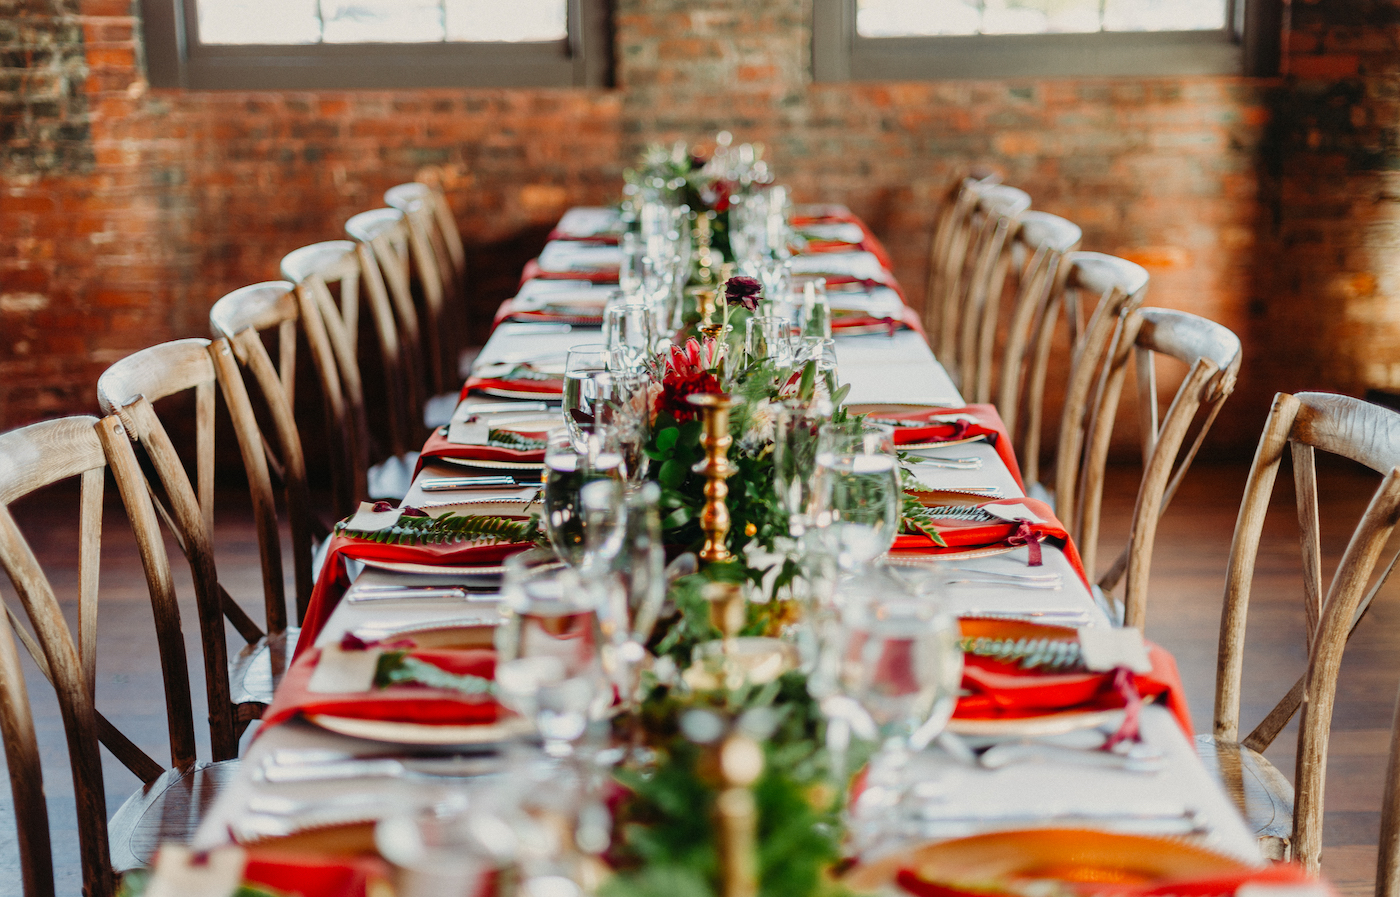 Tampa Wedding Reception at Historic Building Armature Works with Brick Walls | Long Feasting Tables with Wood Cross Back Chairs and Greenery Garland Runners with Gold Candlesticks and Burgundy Maroon Red Napkins